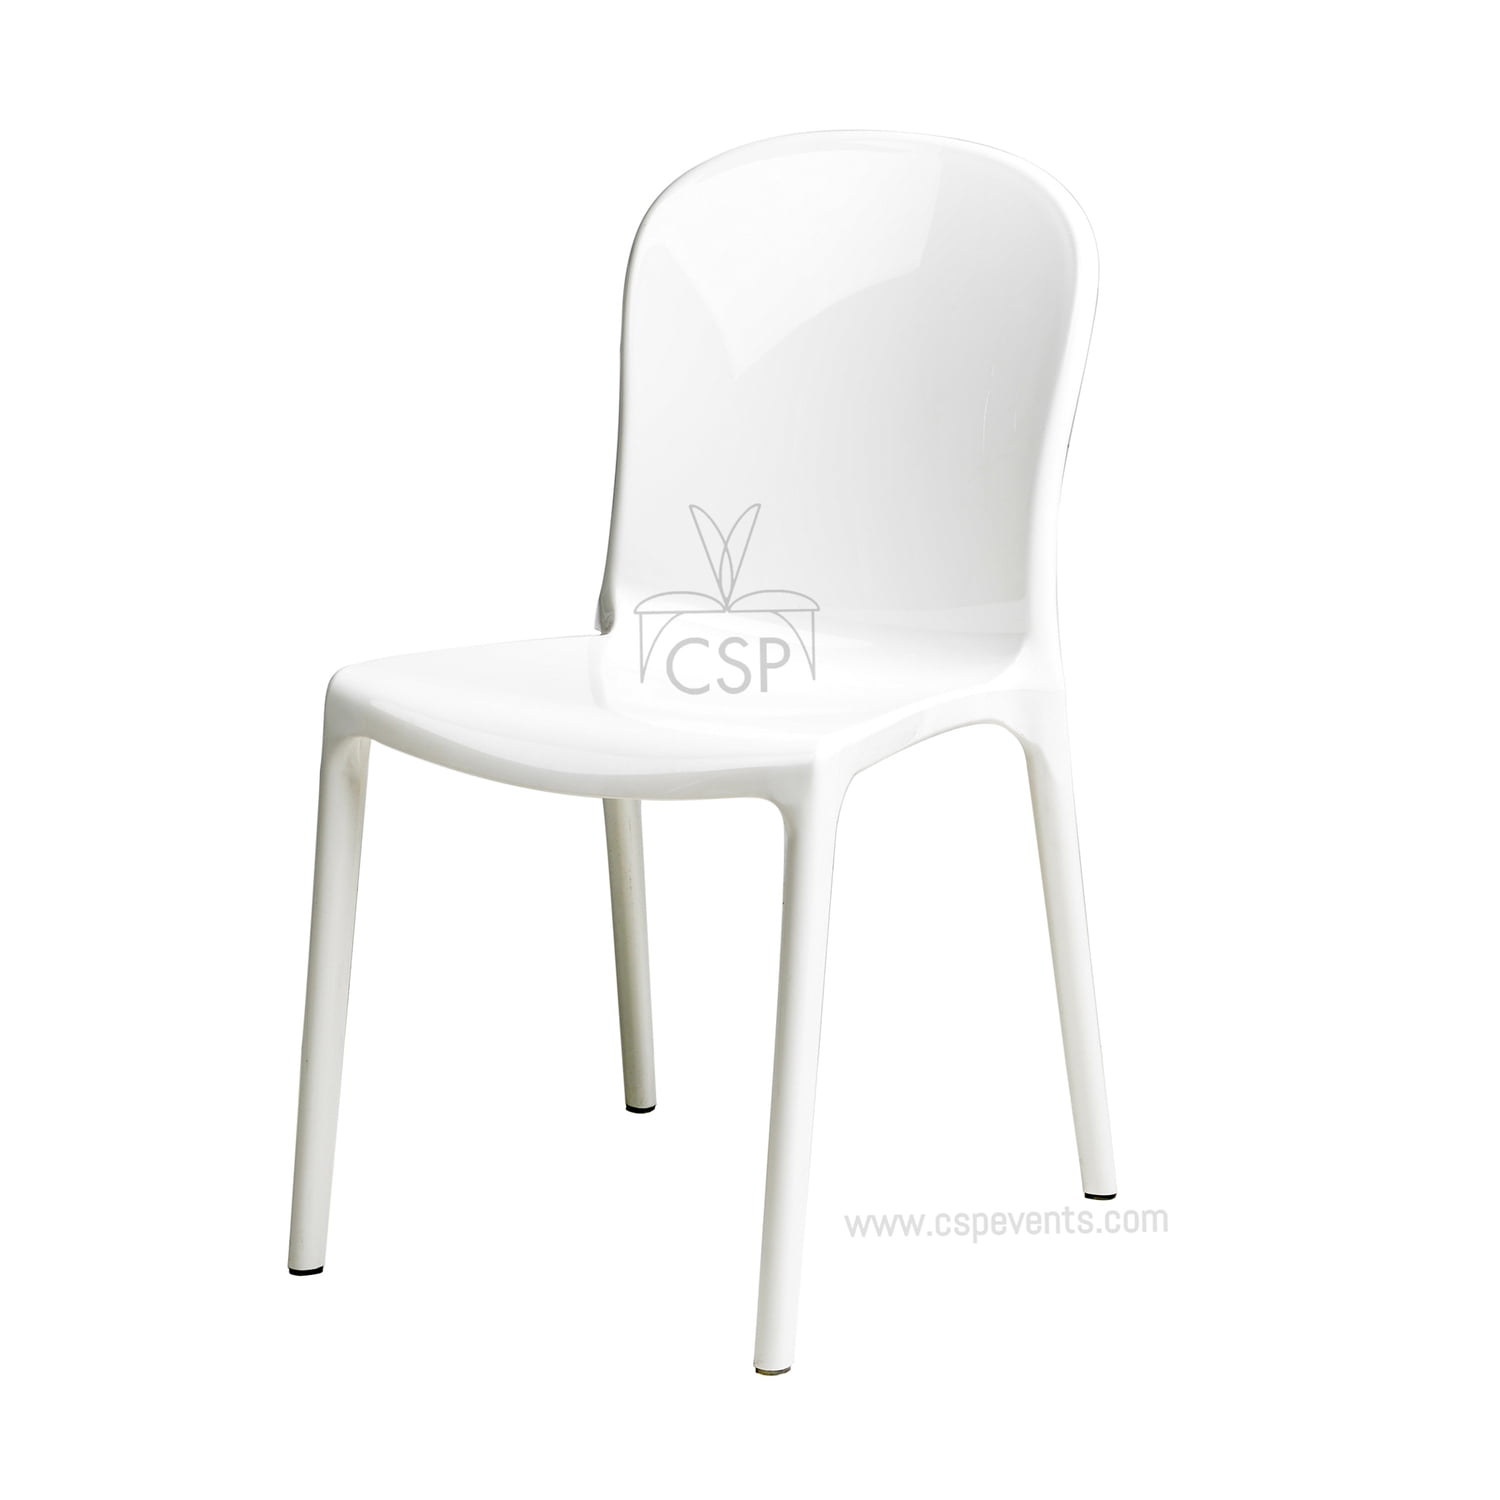 Rpc-genoa-wh Genoa Polycarbonate Dining Chair - White - 33 In.